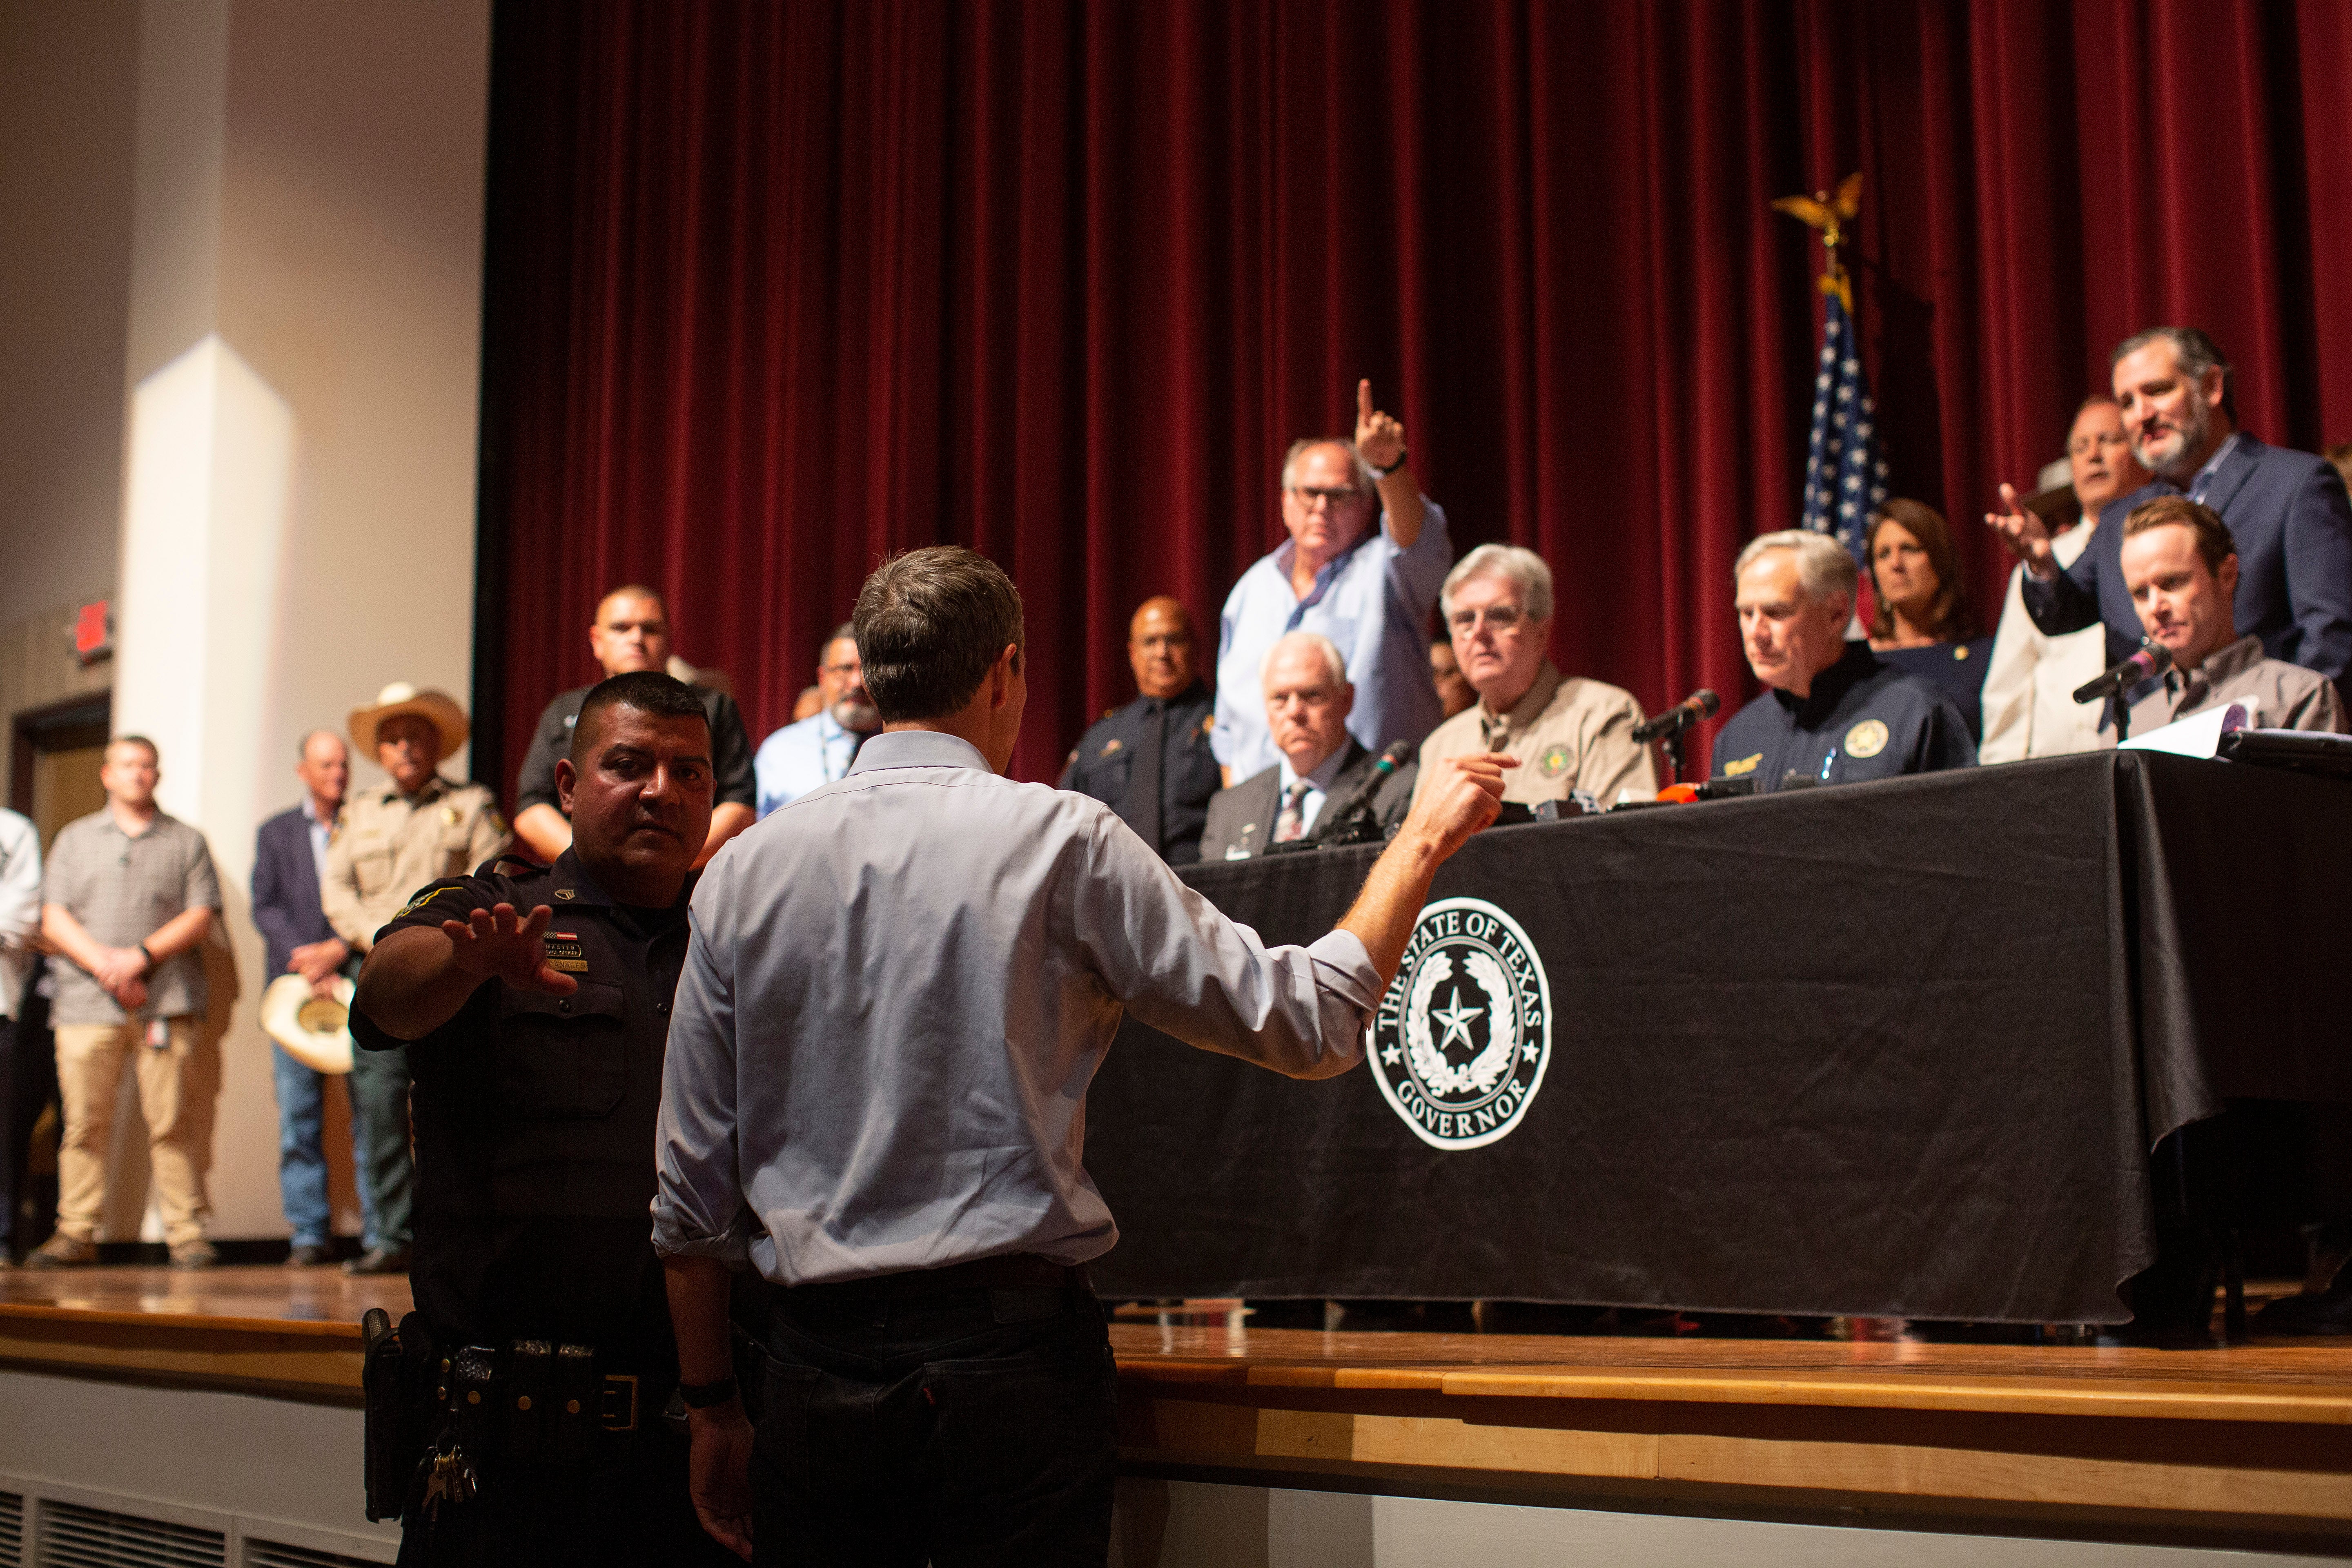 Democrat Beto O’Rourke, who is running against Abbott for governor this year, interrupts a news conference headed by Texas Gov. Greg Abbott in Uvalde, Texas